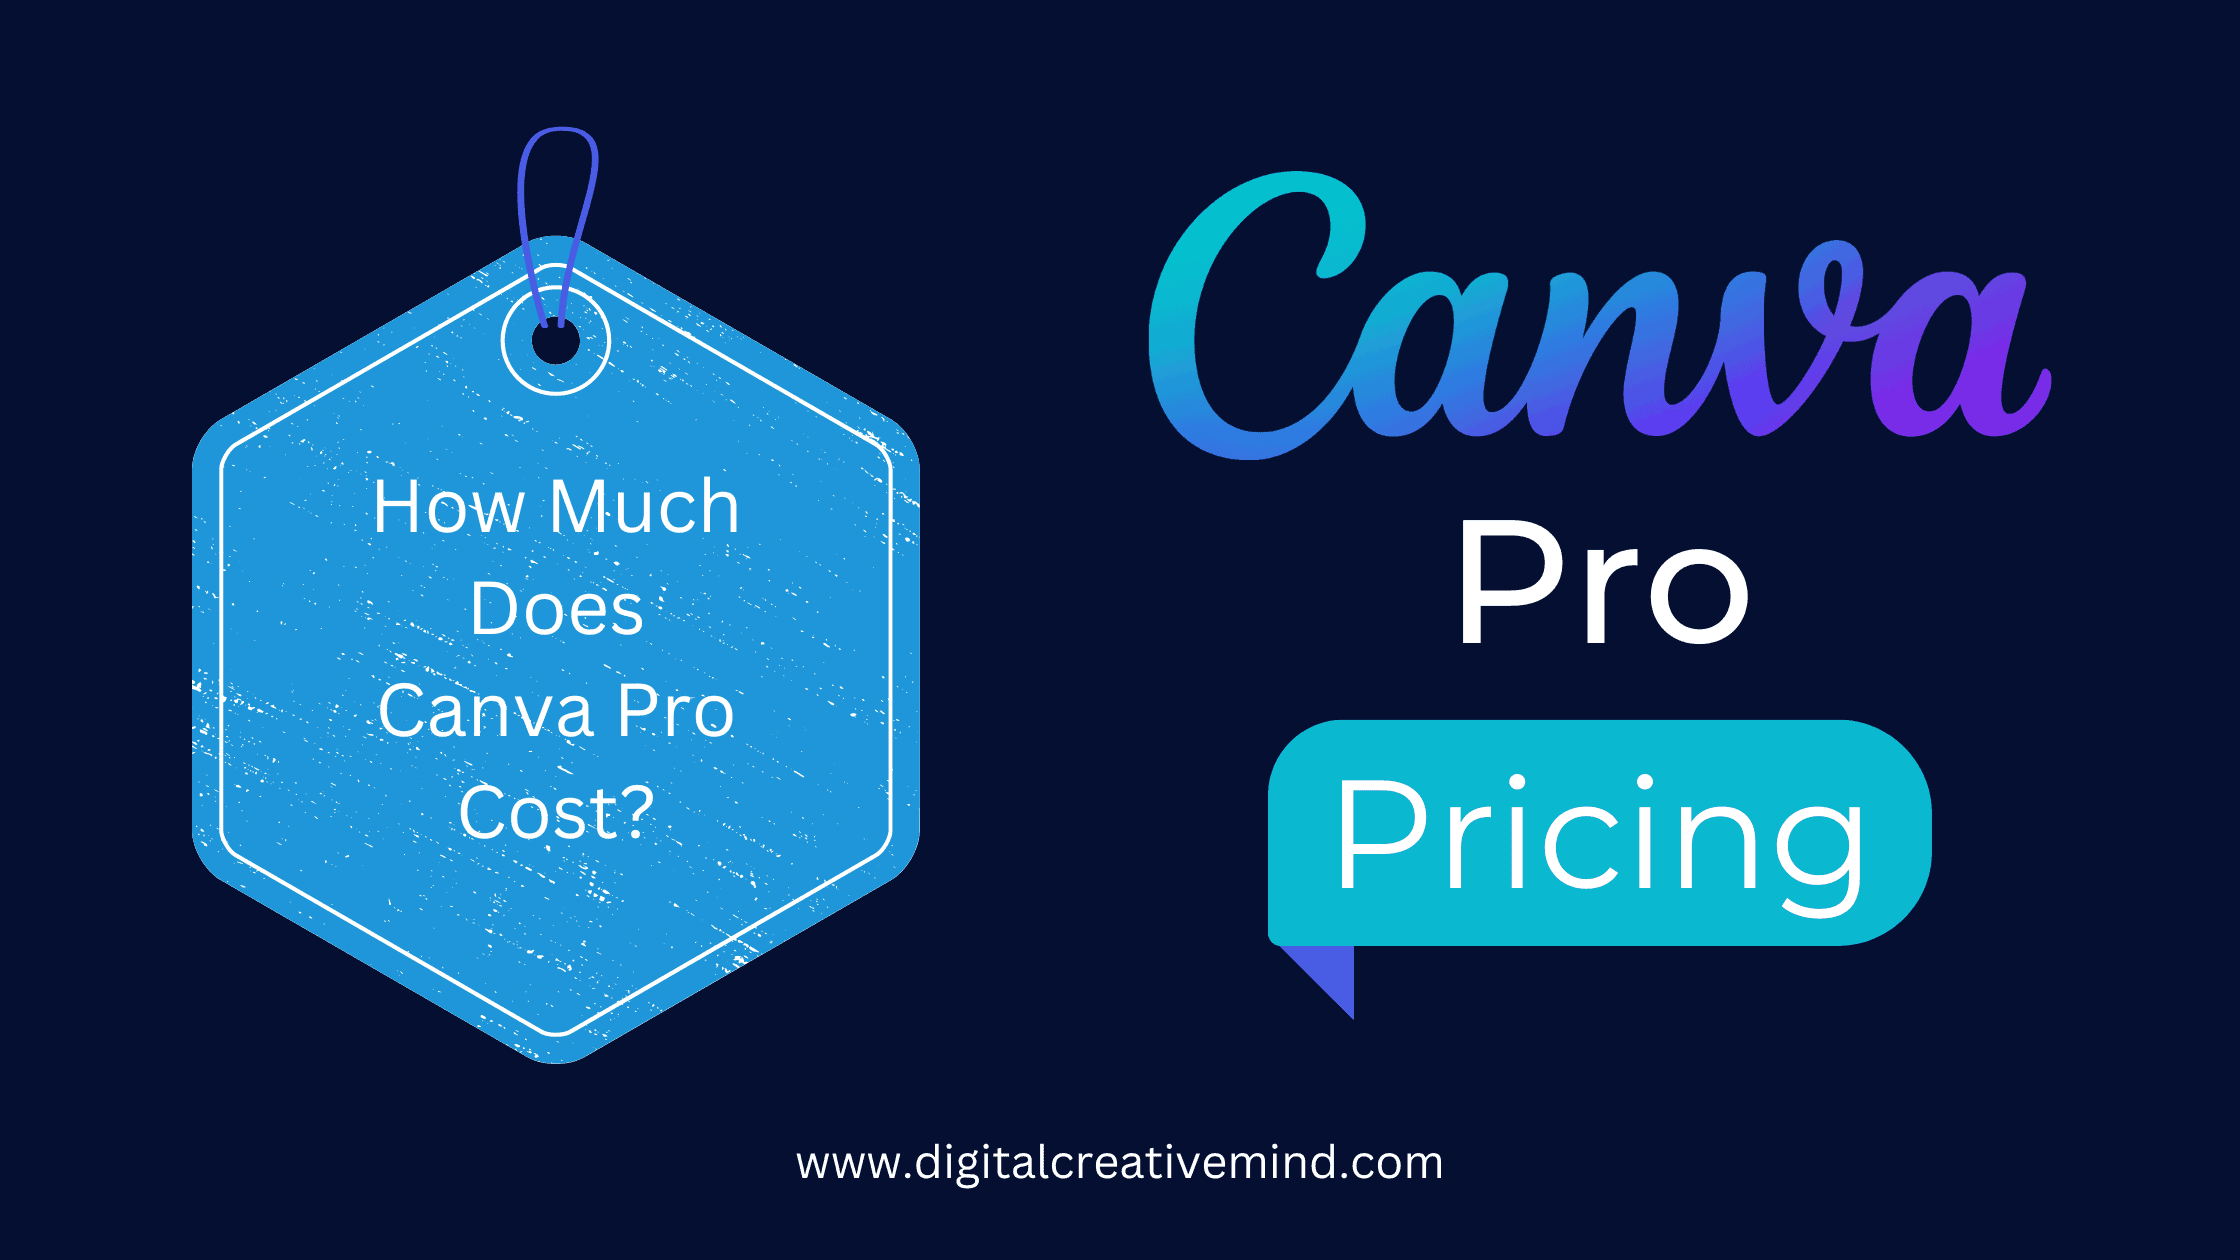 How Much Does Canva Pro Cost Canva Pro Pricing Guide